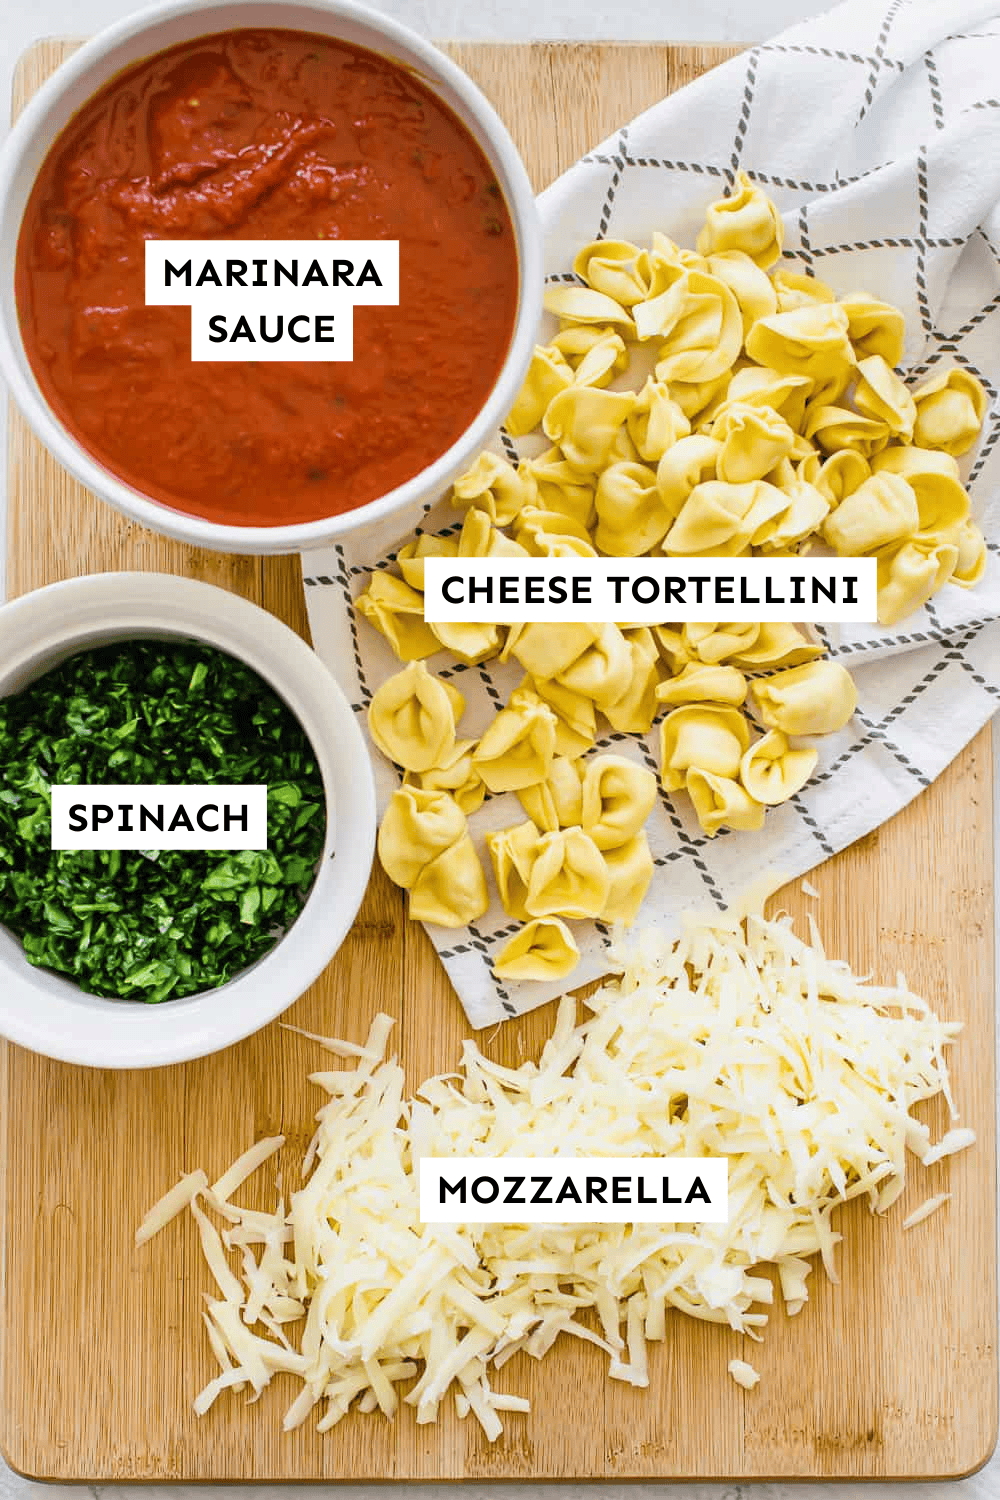 Baked tortellini ingredients measured out and labeled.